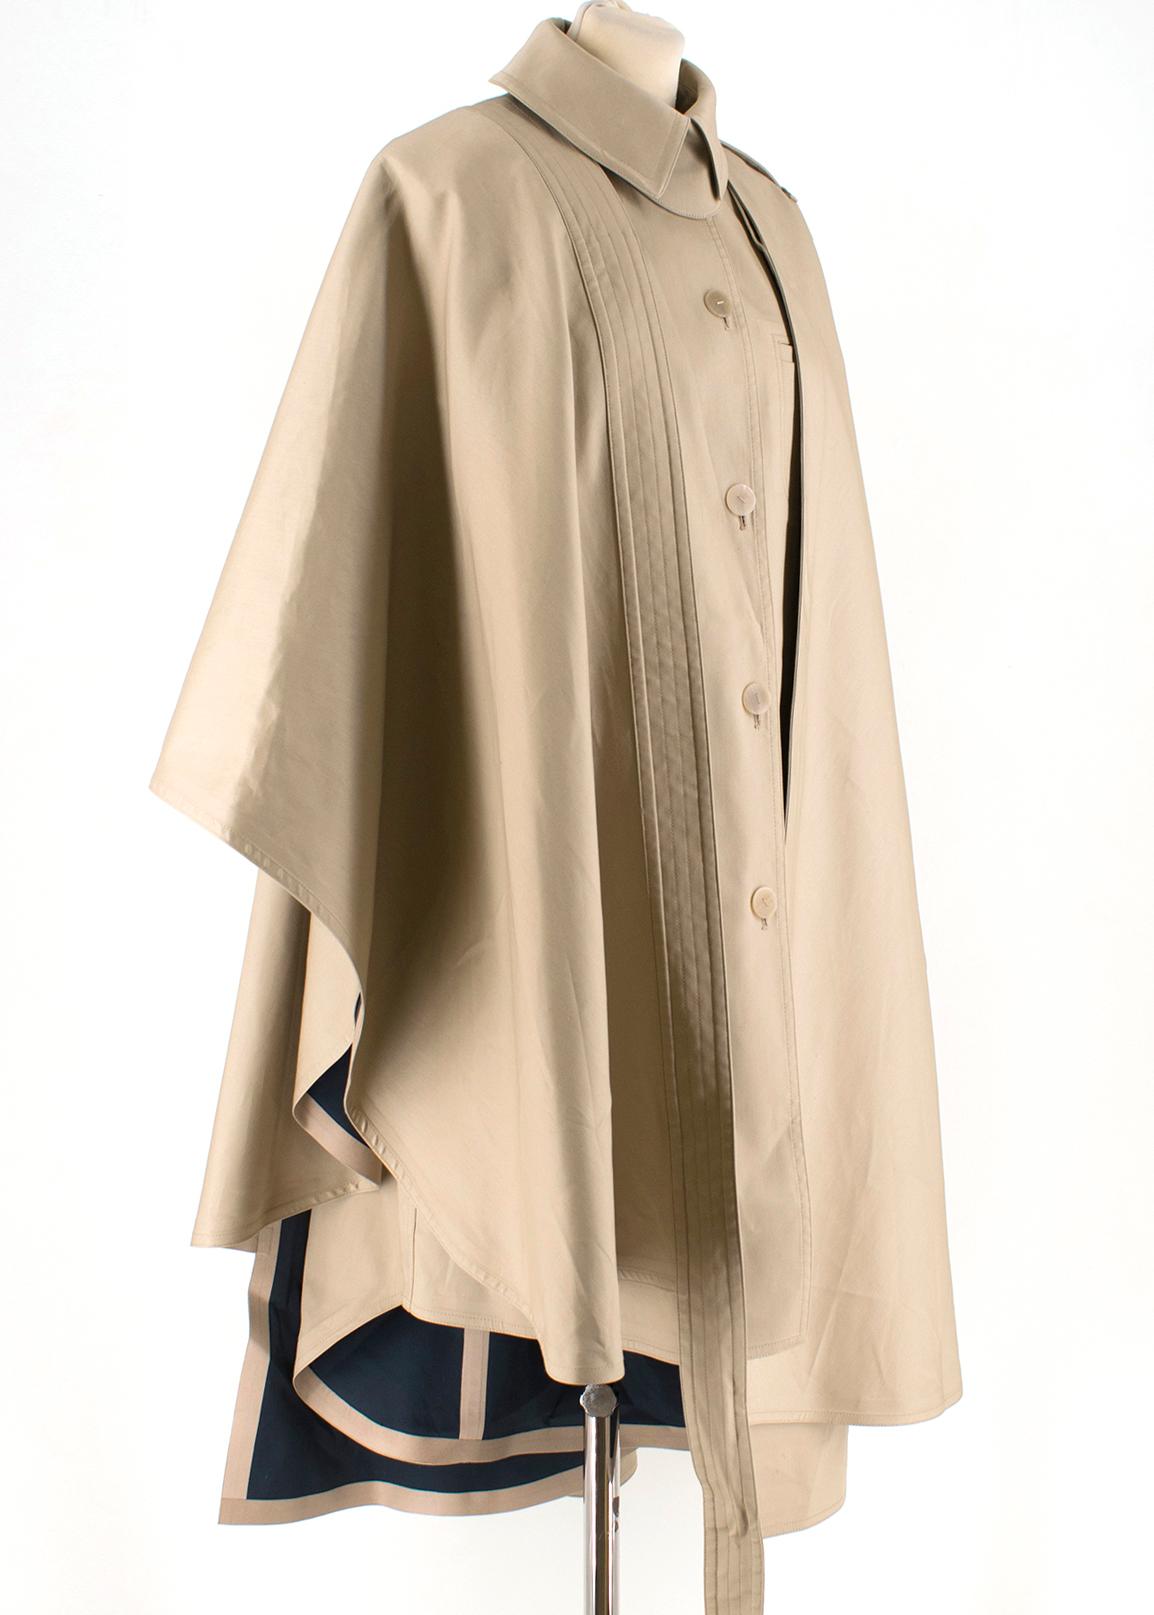 Loewe Convertible asymmetric cotton cape

- Cape
- Cotton-gabardine
- Detachable overlay
- Front welt pocket
- Breast pocket
- Button fastenings through front
- Fully lined
- Asymmetric hem
- Non-stretchy fabric
- Mid-weight fabric

Cotton 100%

Dry